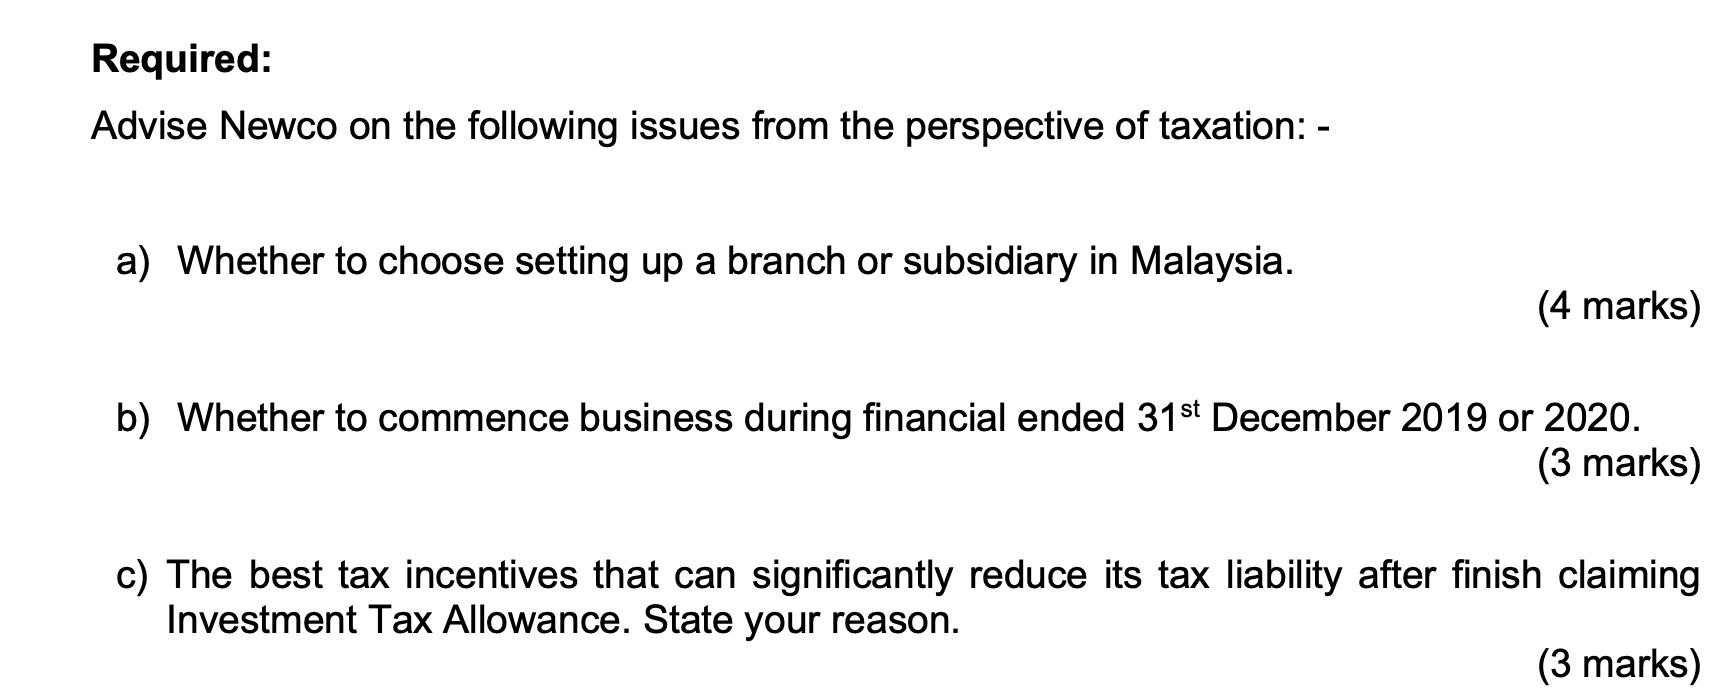 Required: Advise Newco on the following issues from the perspective of taxation: - a) Whether to choose setting up a branch o